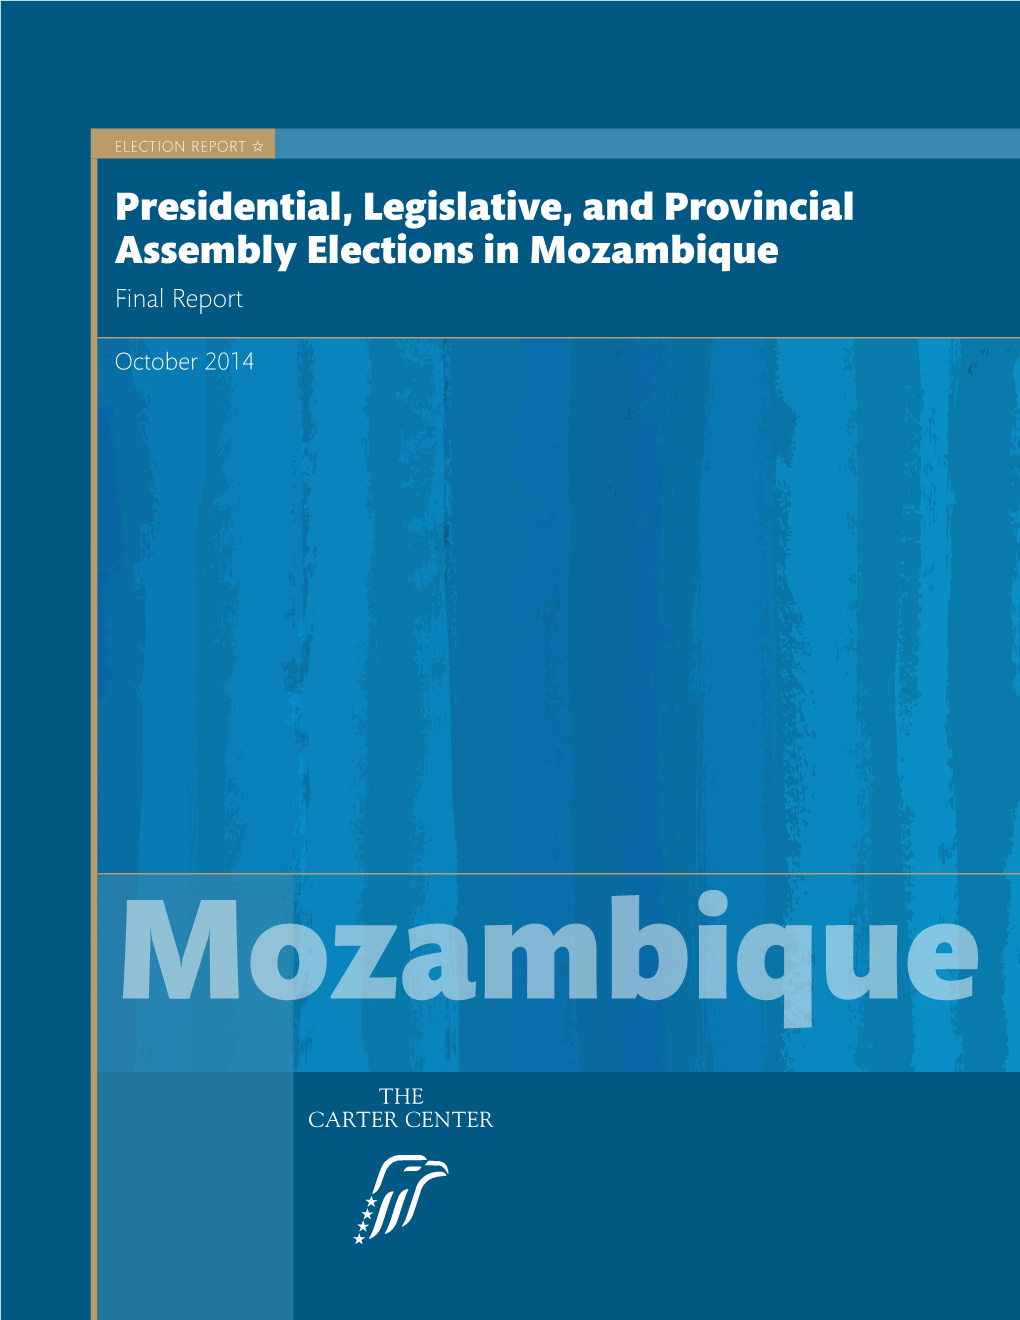 Final Report: 2014 Presidential, Legislative, and Provincial Assembly Elections in Mozambique